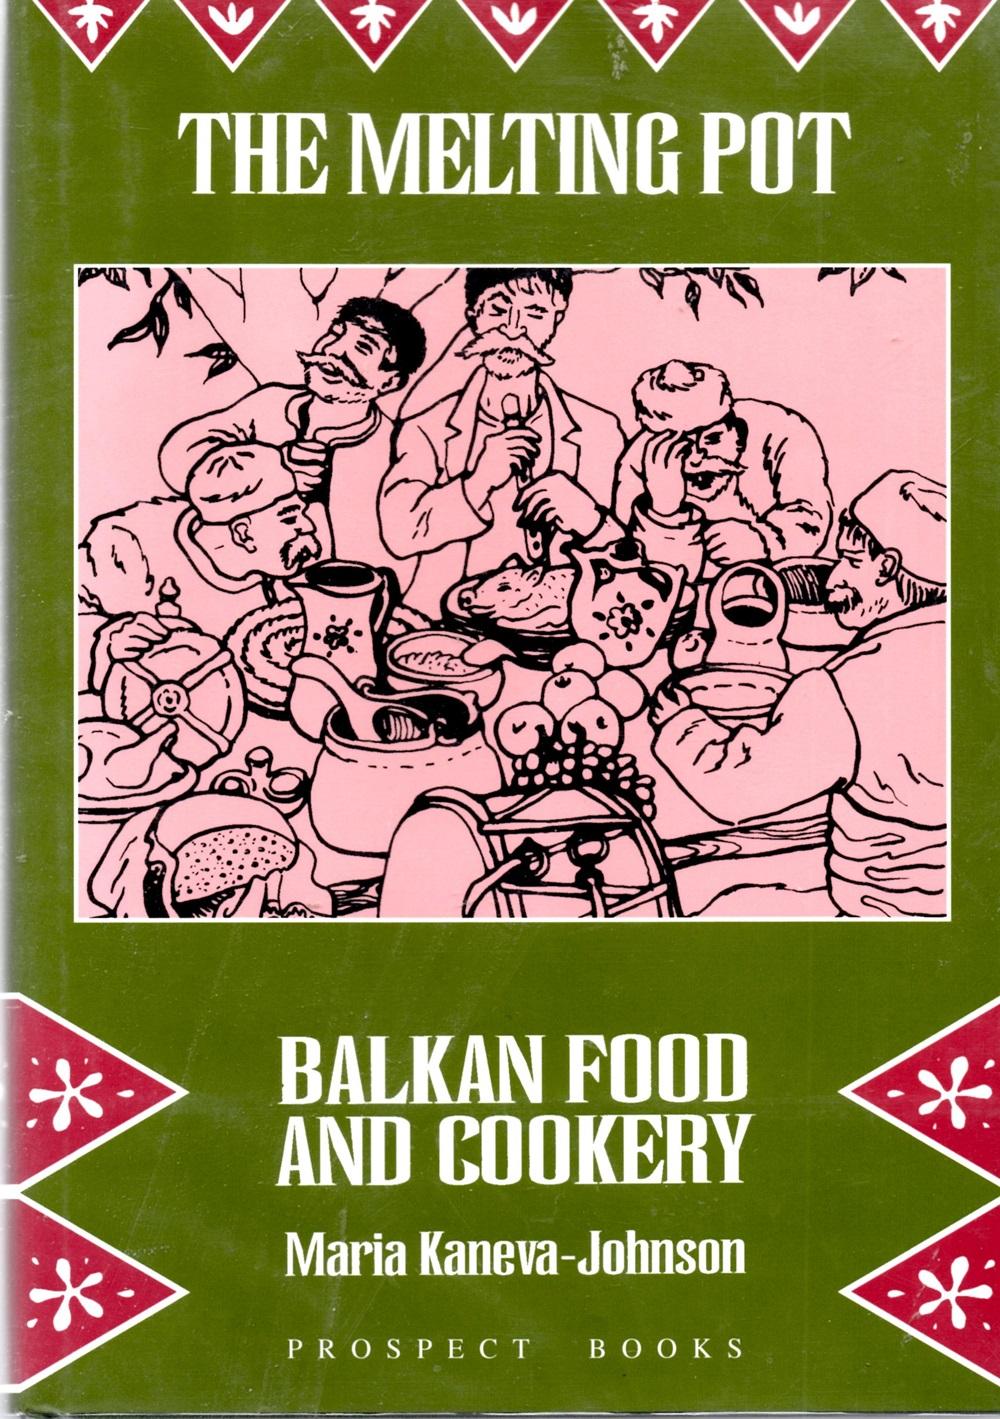 The Melting Pot: Balkan Food and Cookery